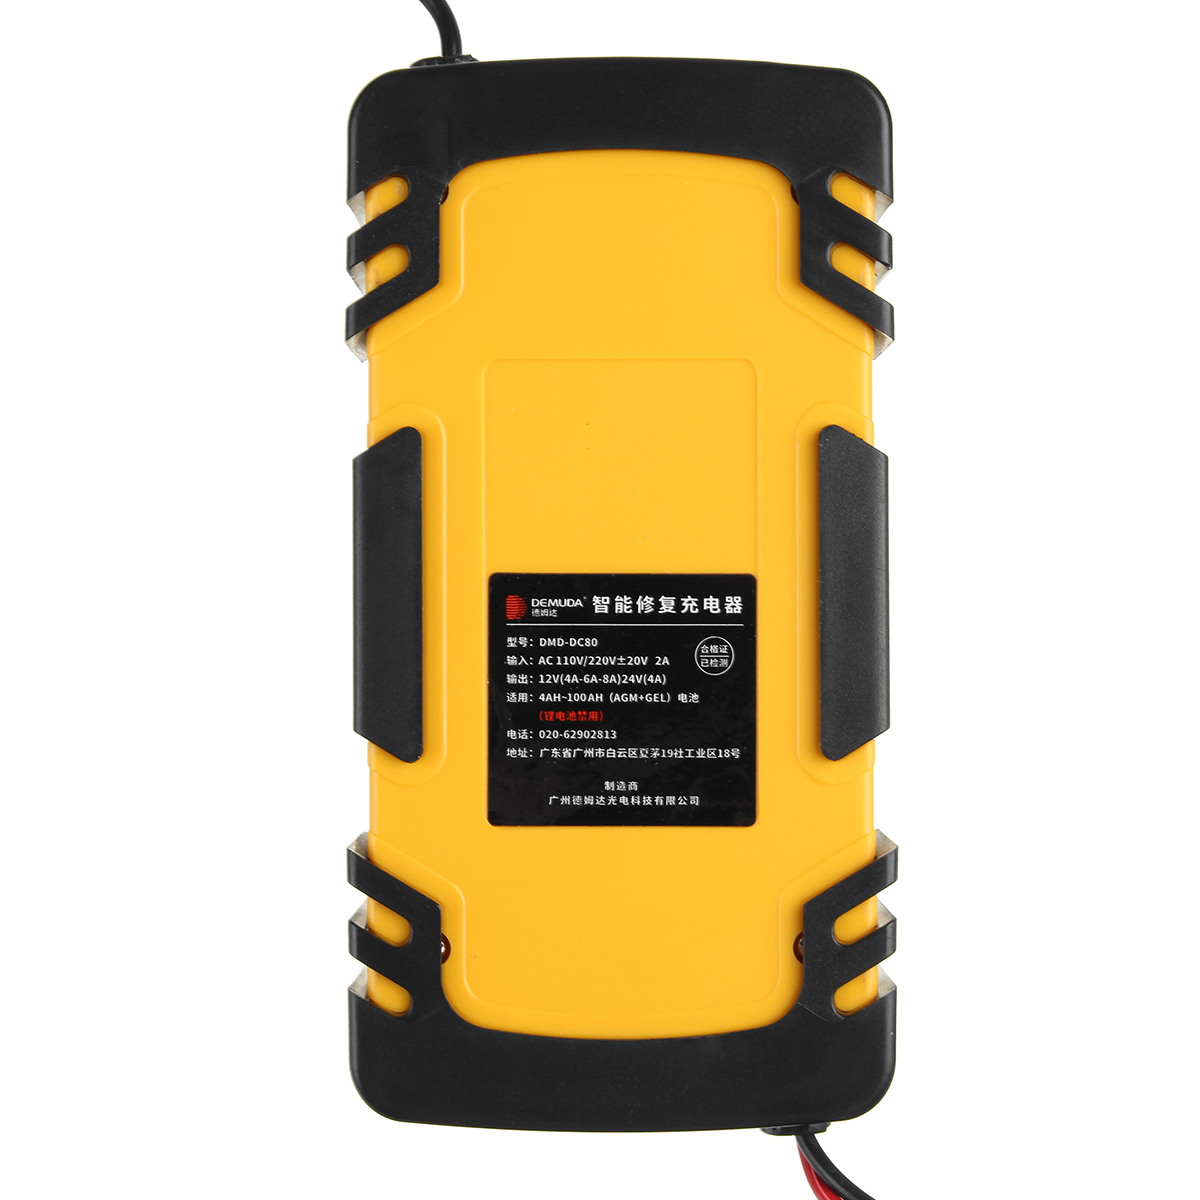 100W 12V/24V 4A/6A/8A Pulse Repair LCD Battery Charger for Car Motorcycle Lead Acid Battery Agm Gel Wet - Auto GoShop